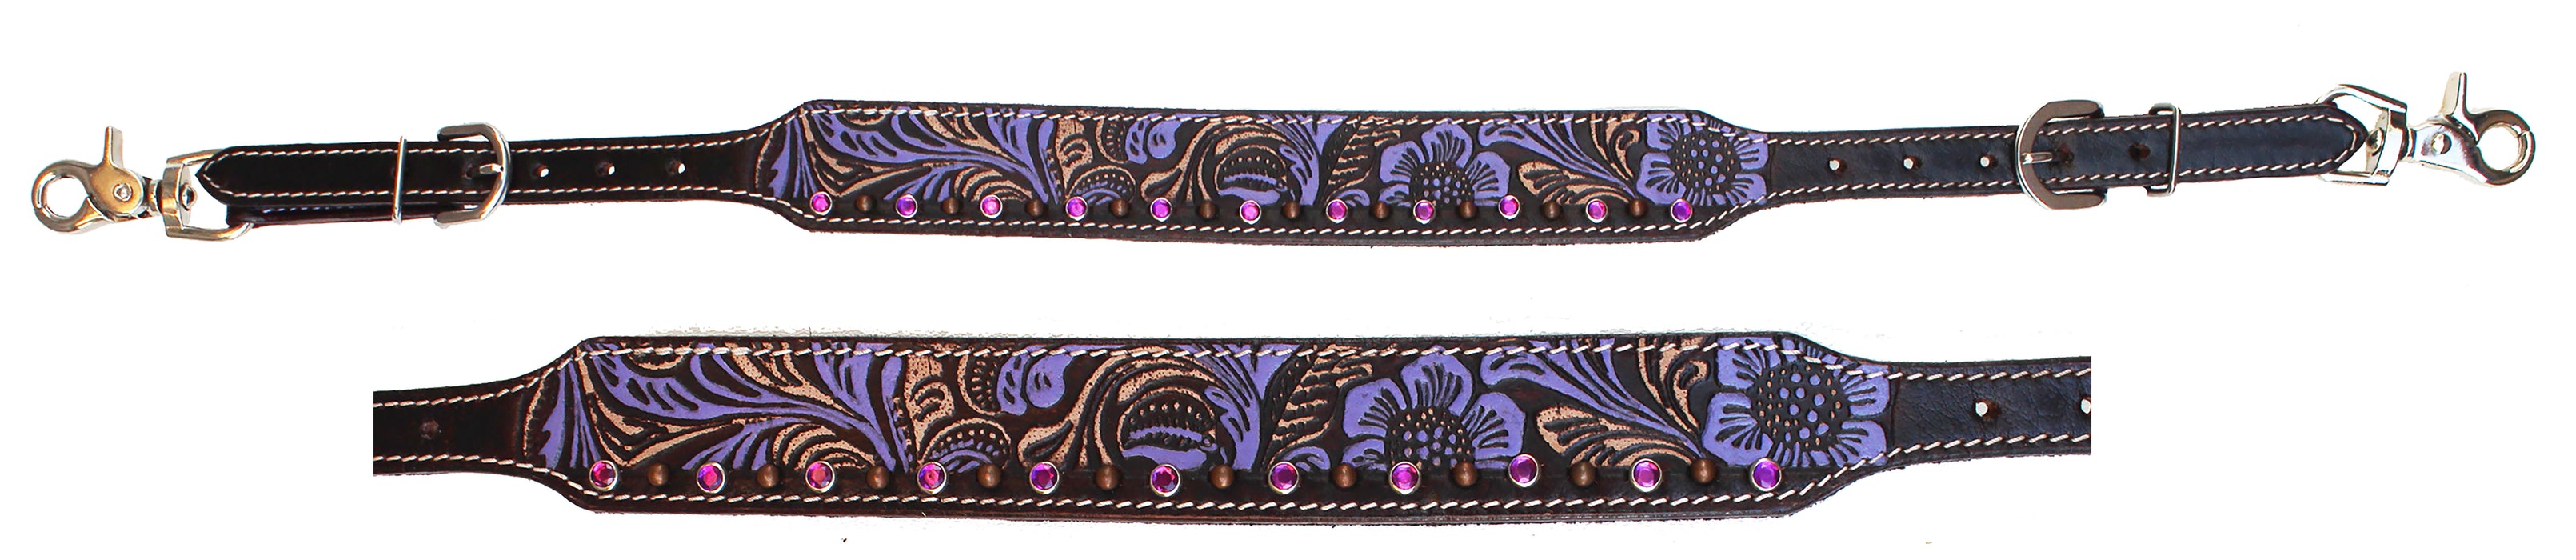 Western  Tack Floral Tooled Leather Wither Breast Collar Strap  10503